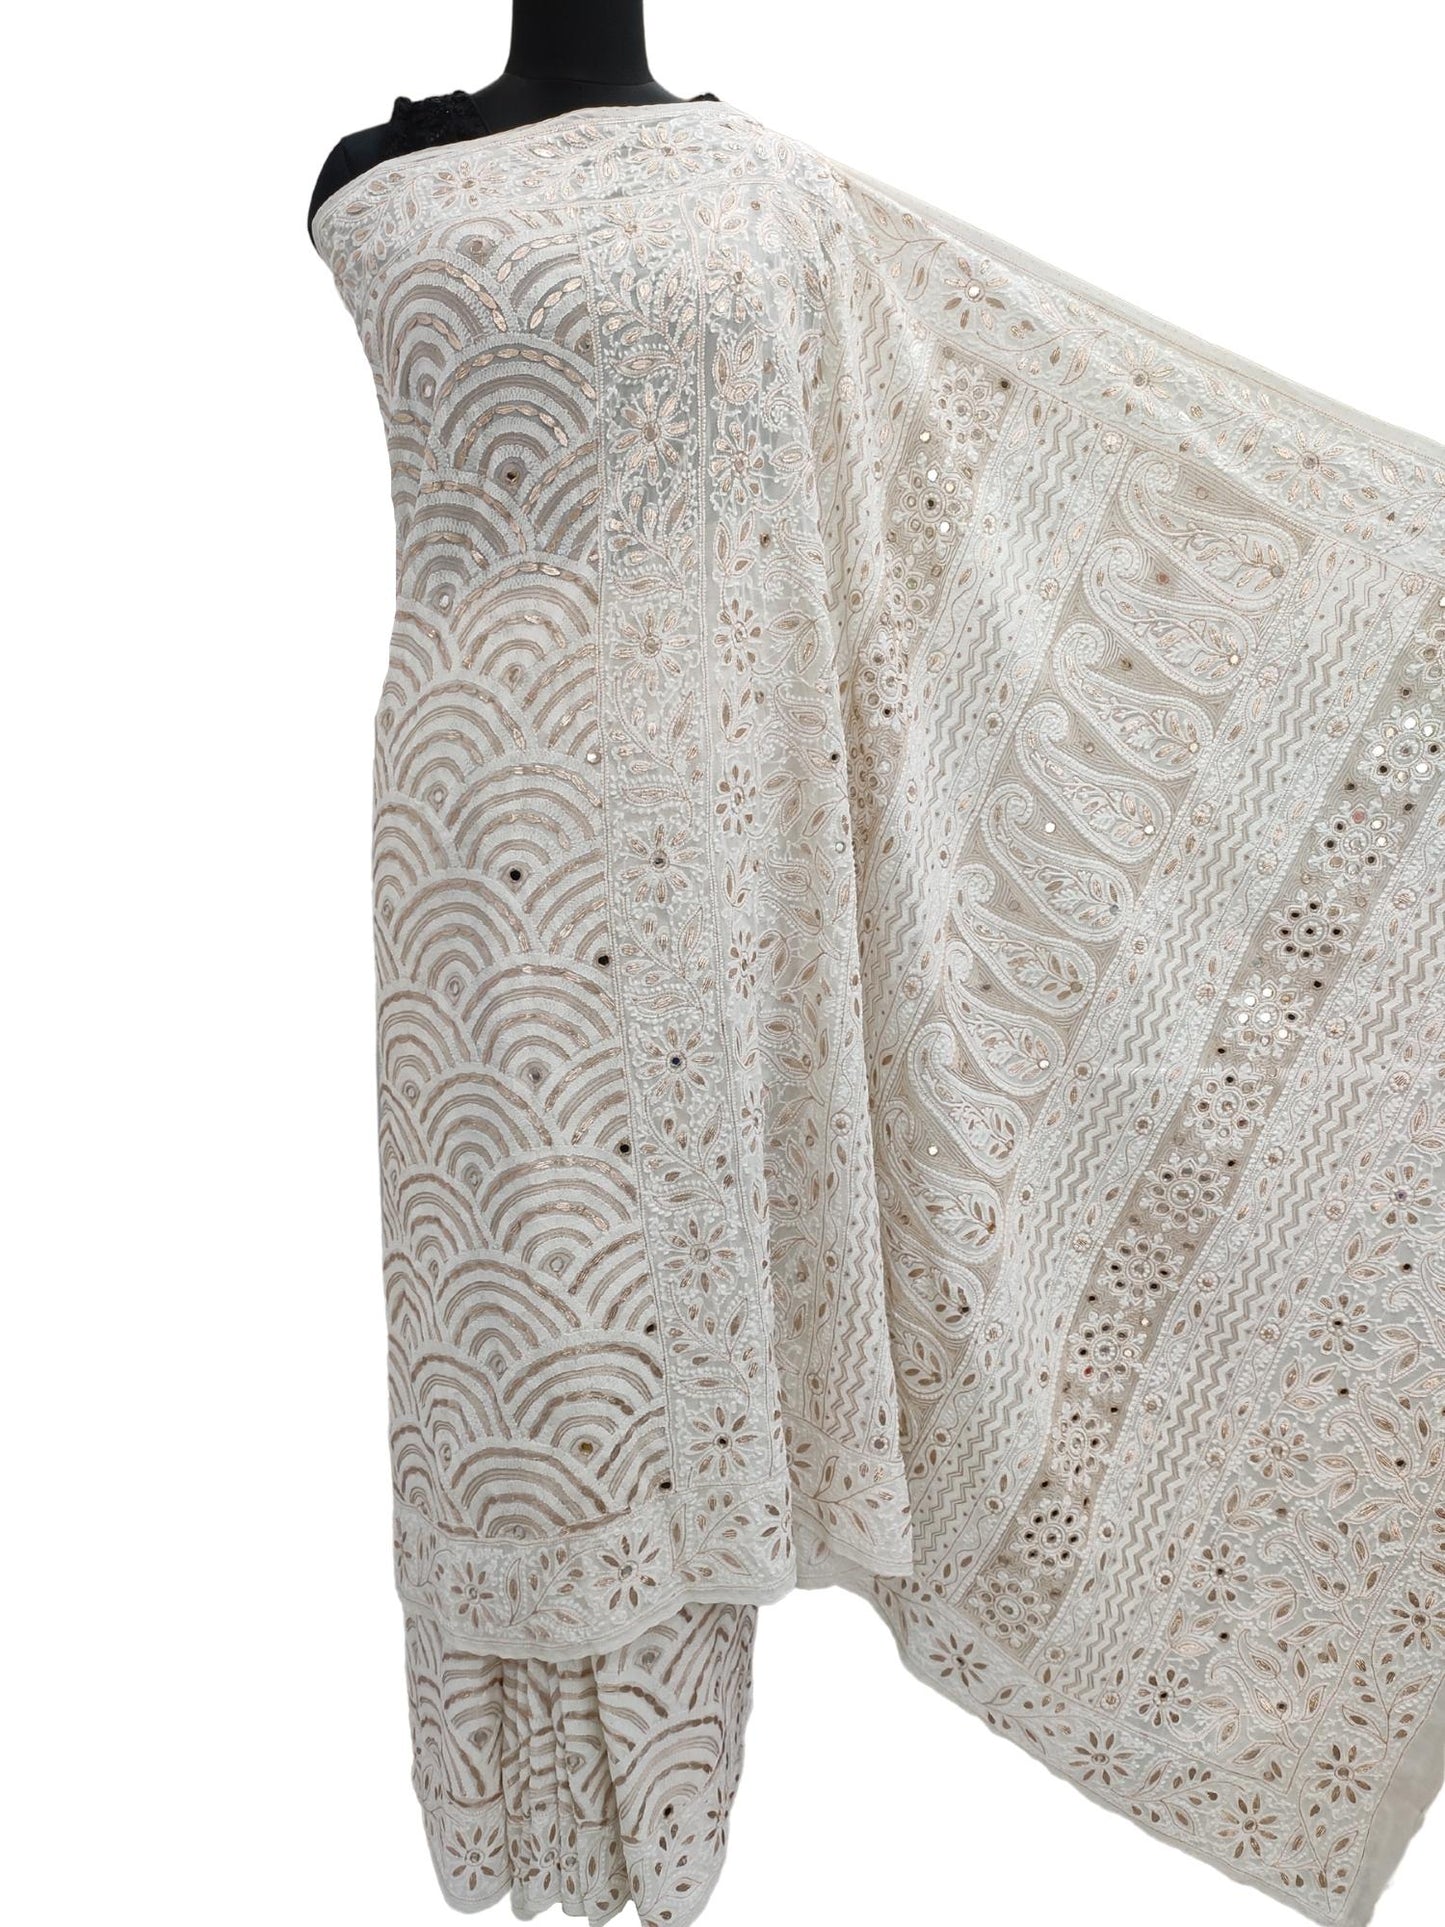 Shyamal Chikan Hand Embroidered White Pure Georgette Lucknowi Chikankari Saree With Blouse Piece, Gotta Patti and Mirror Work - S13585